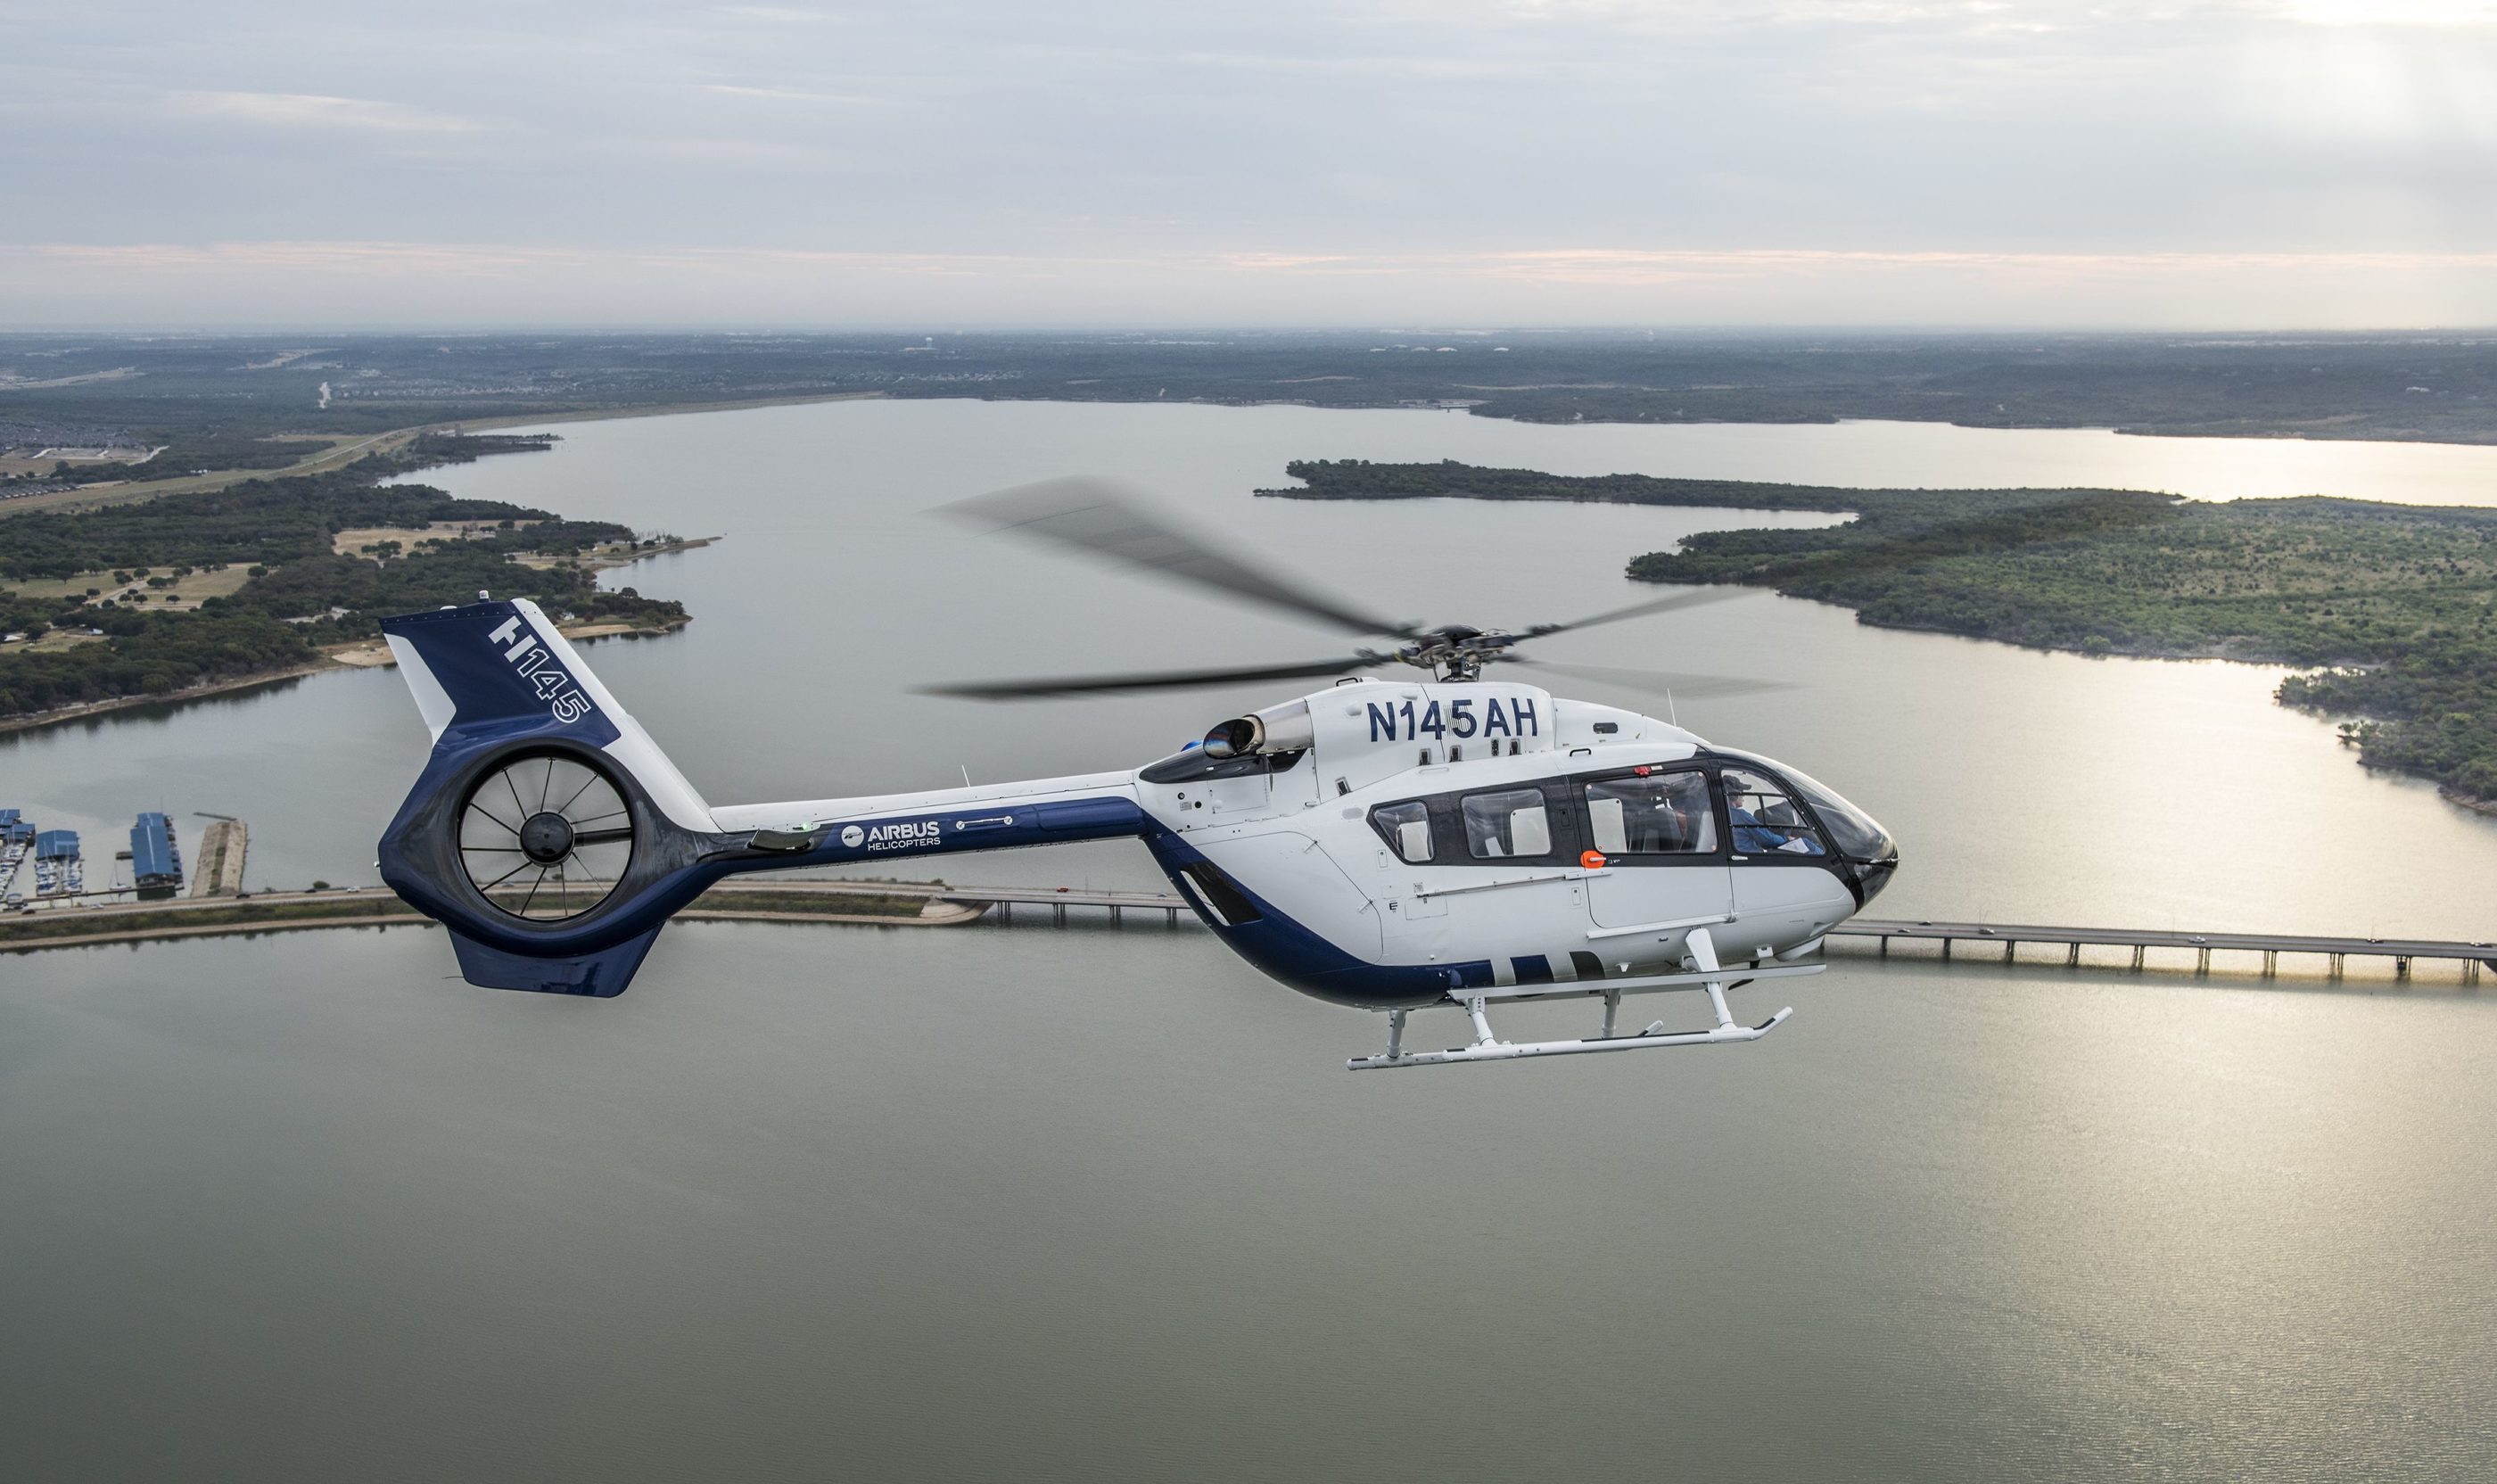 STARS selected Airbus’s H145 helicopter in 2018 as the fleet replacement aircraft for its aging air ambulance fleet. Jay Miller Photo